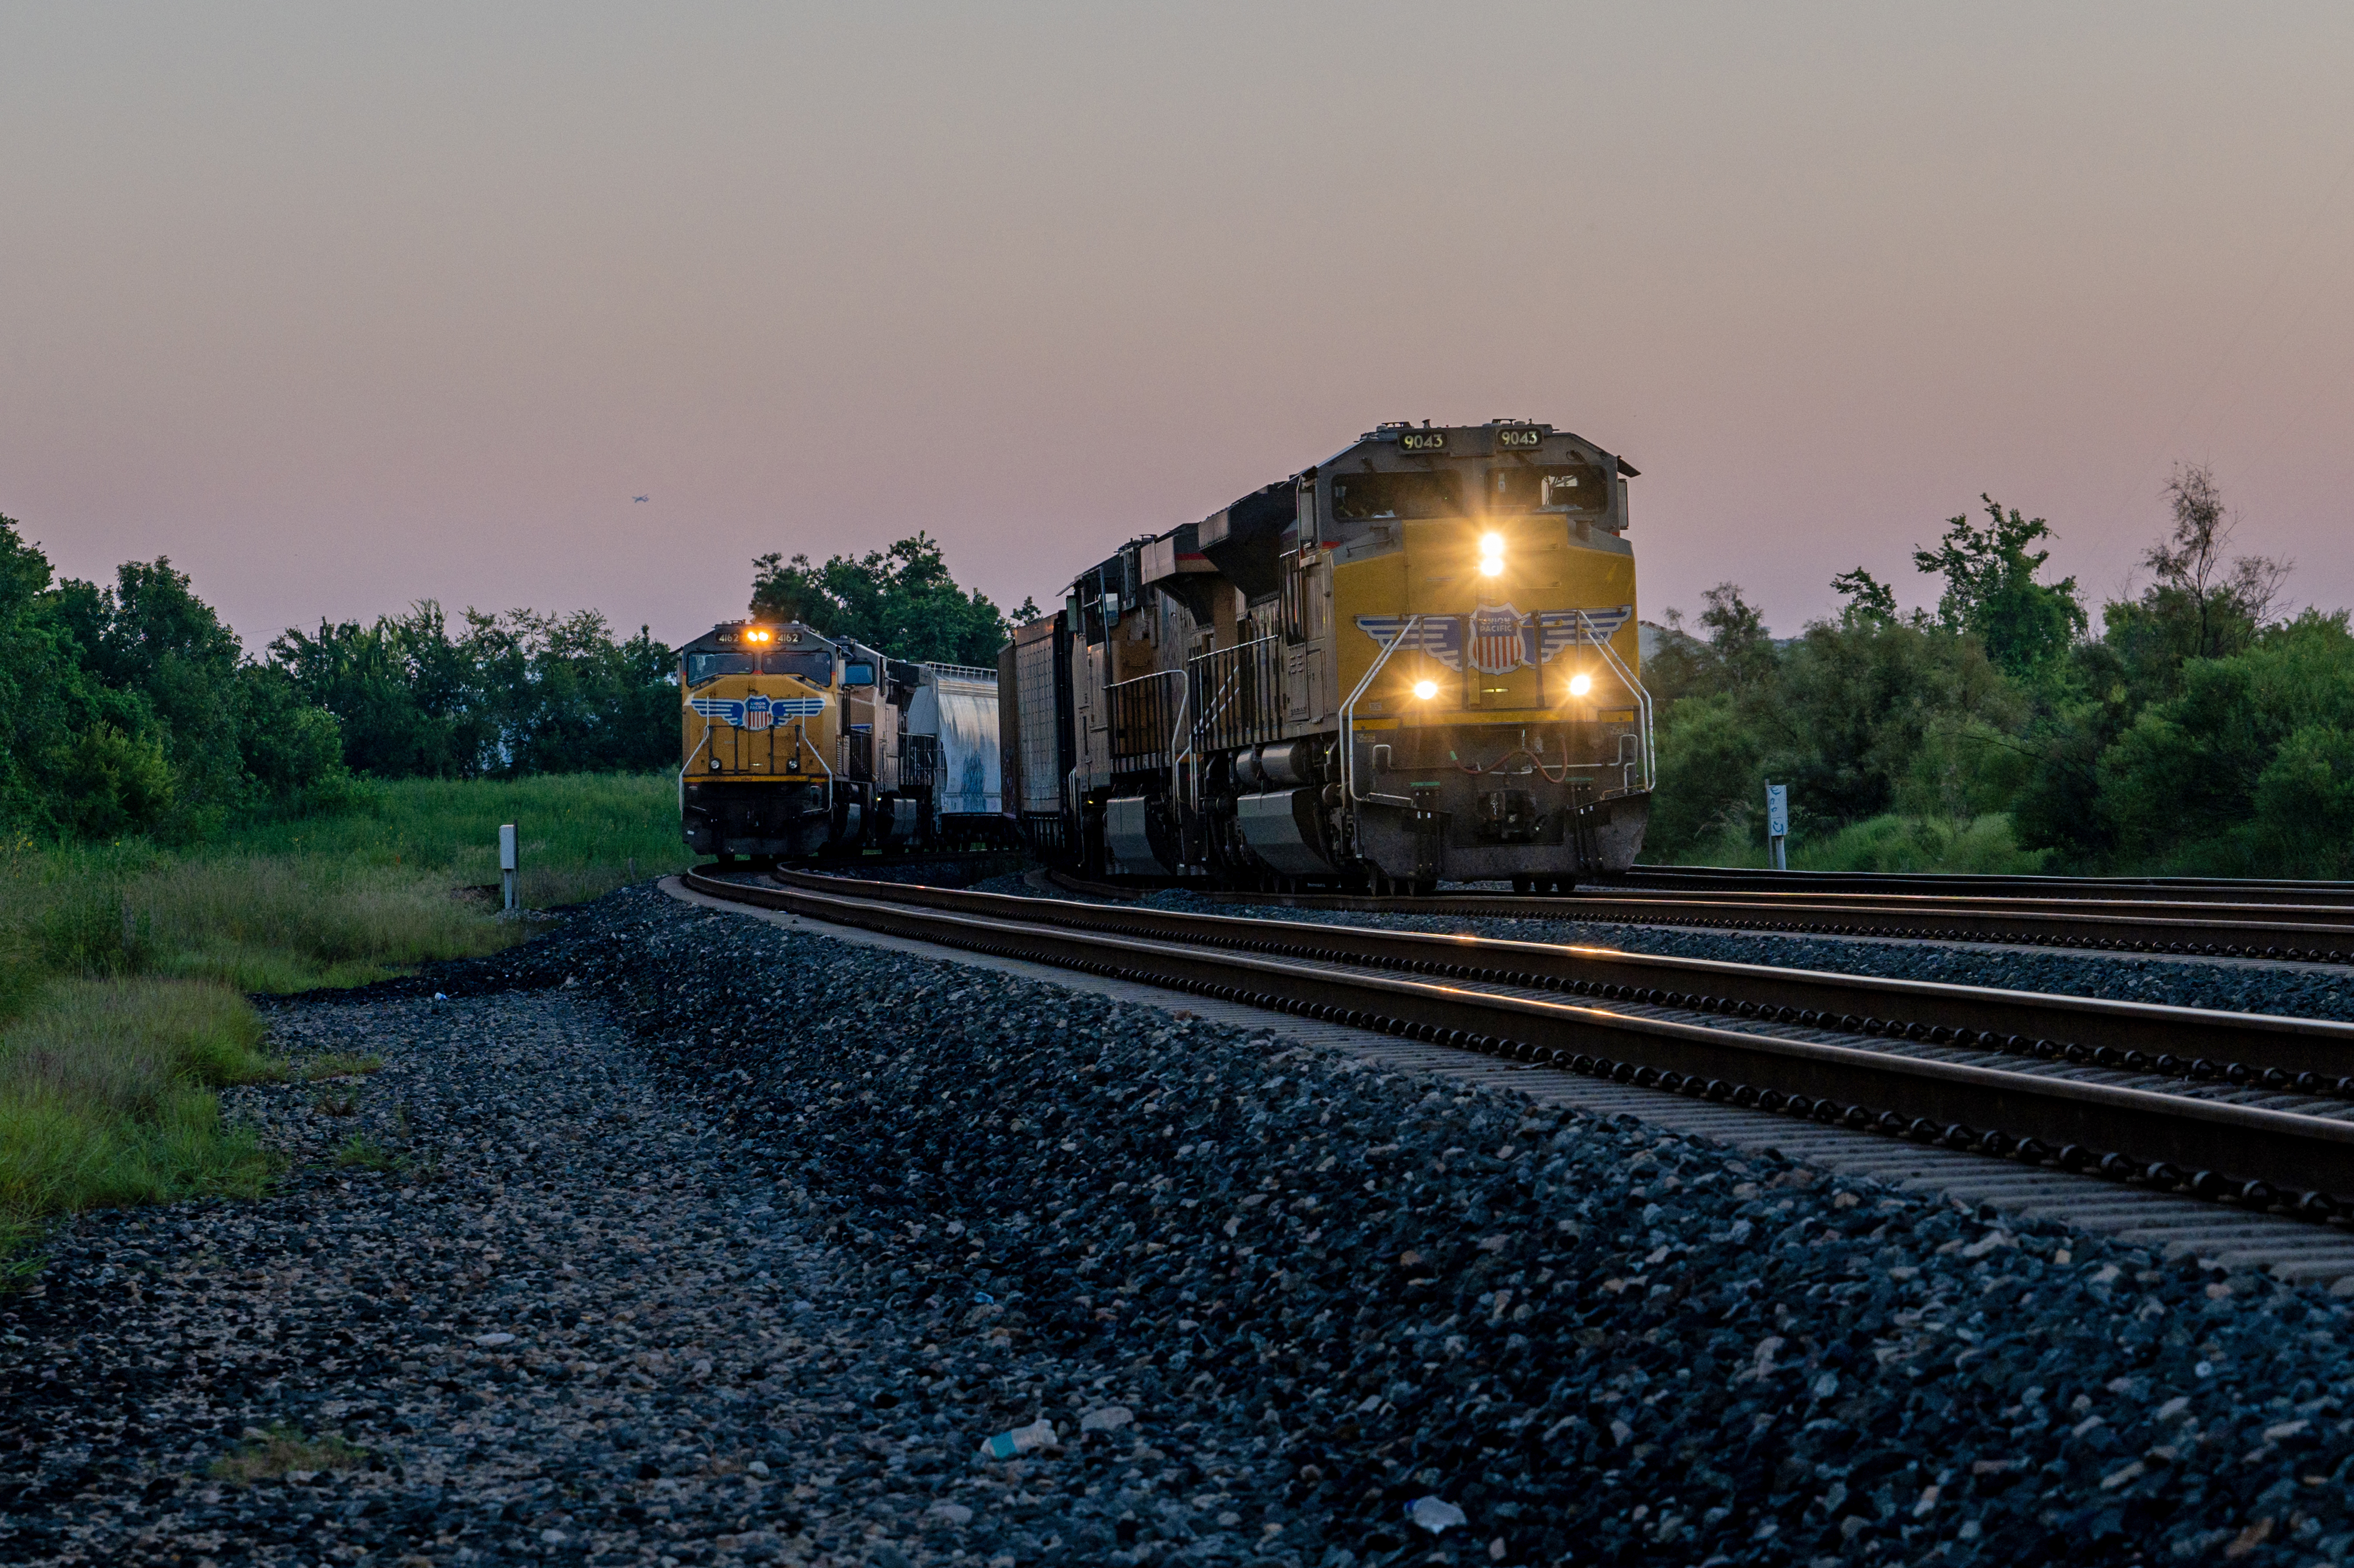 Two freight trains on parallel tracks.